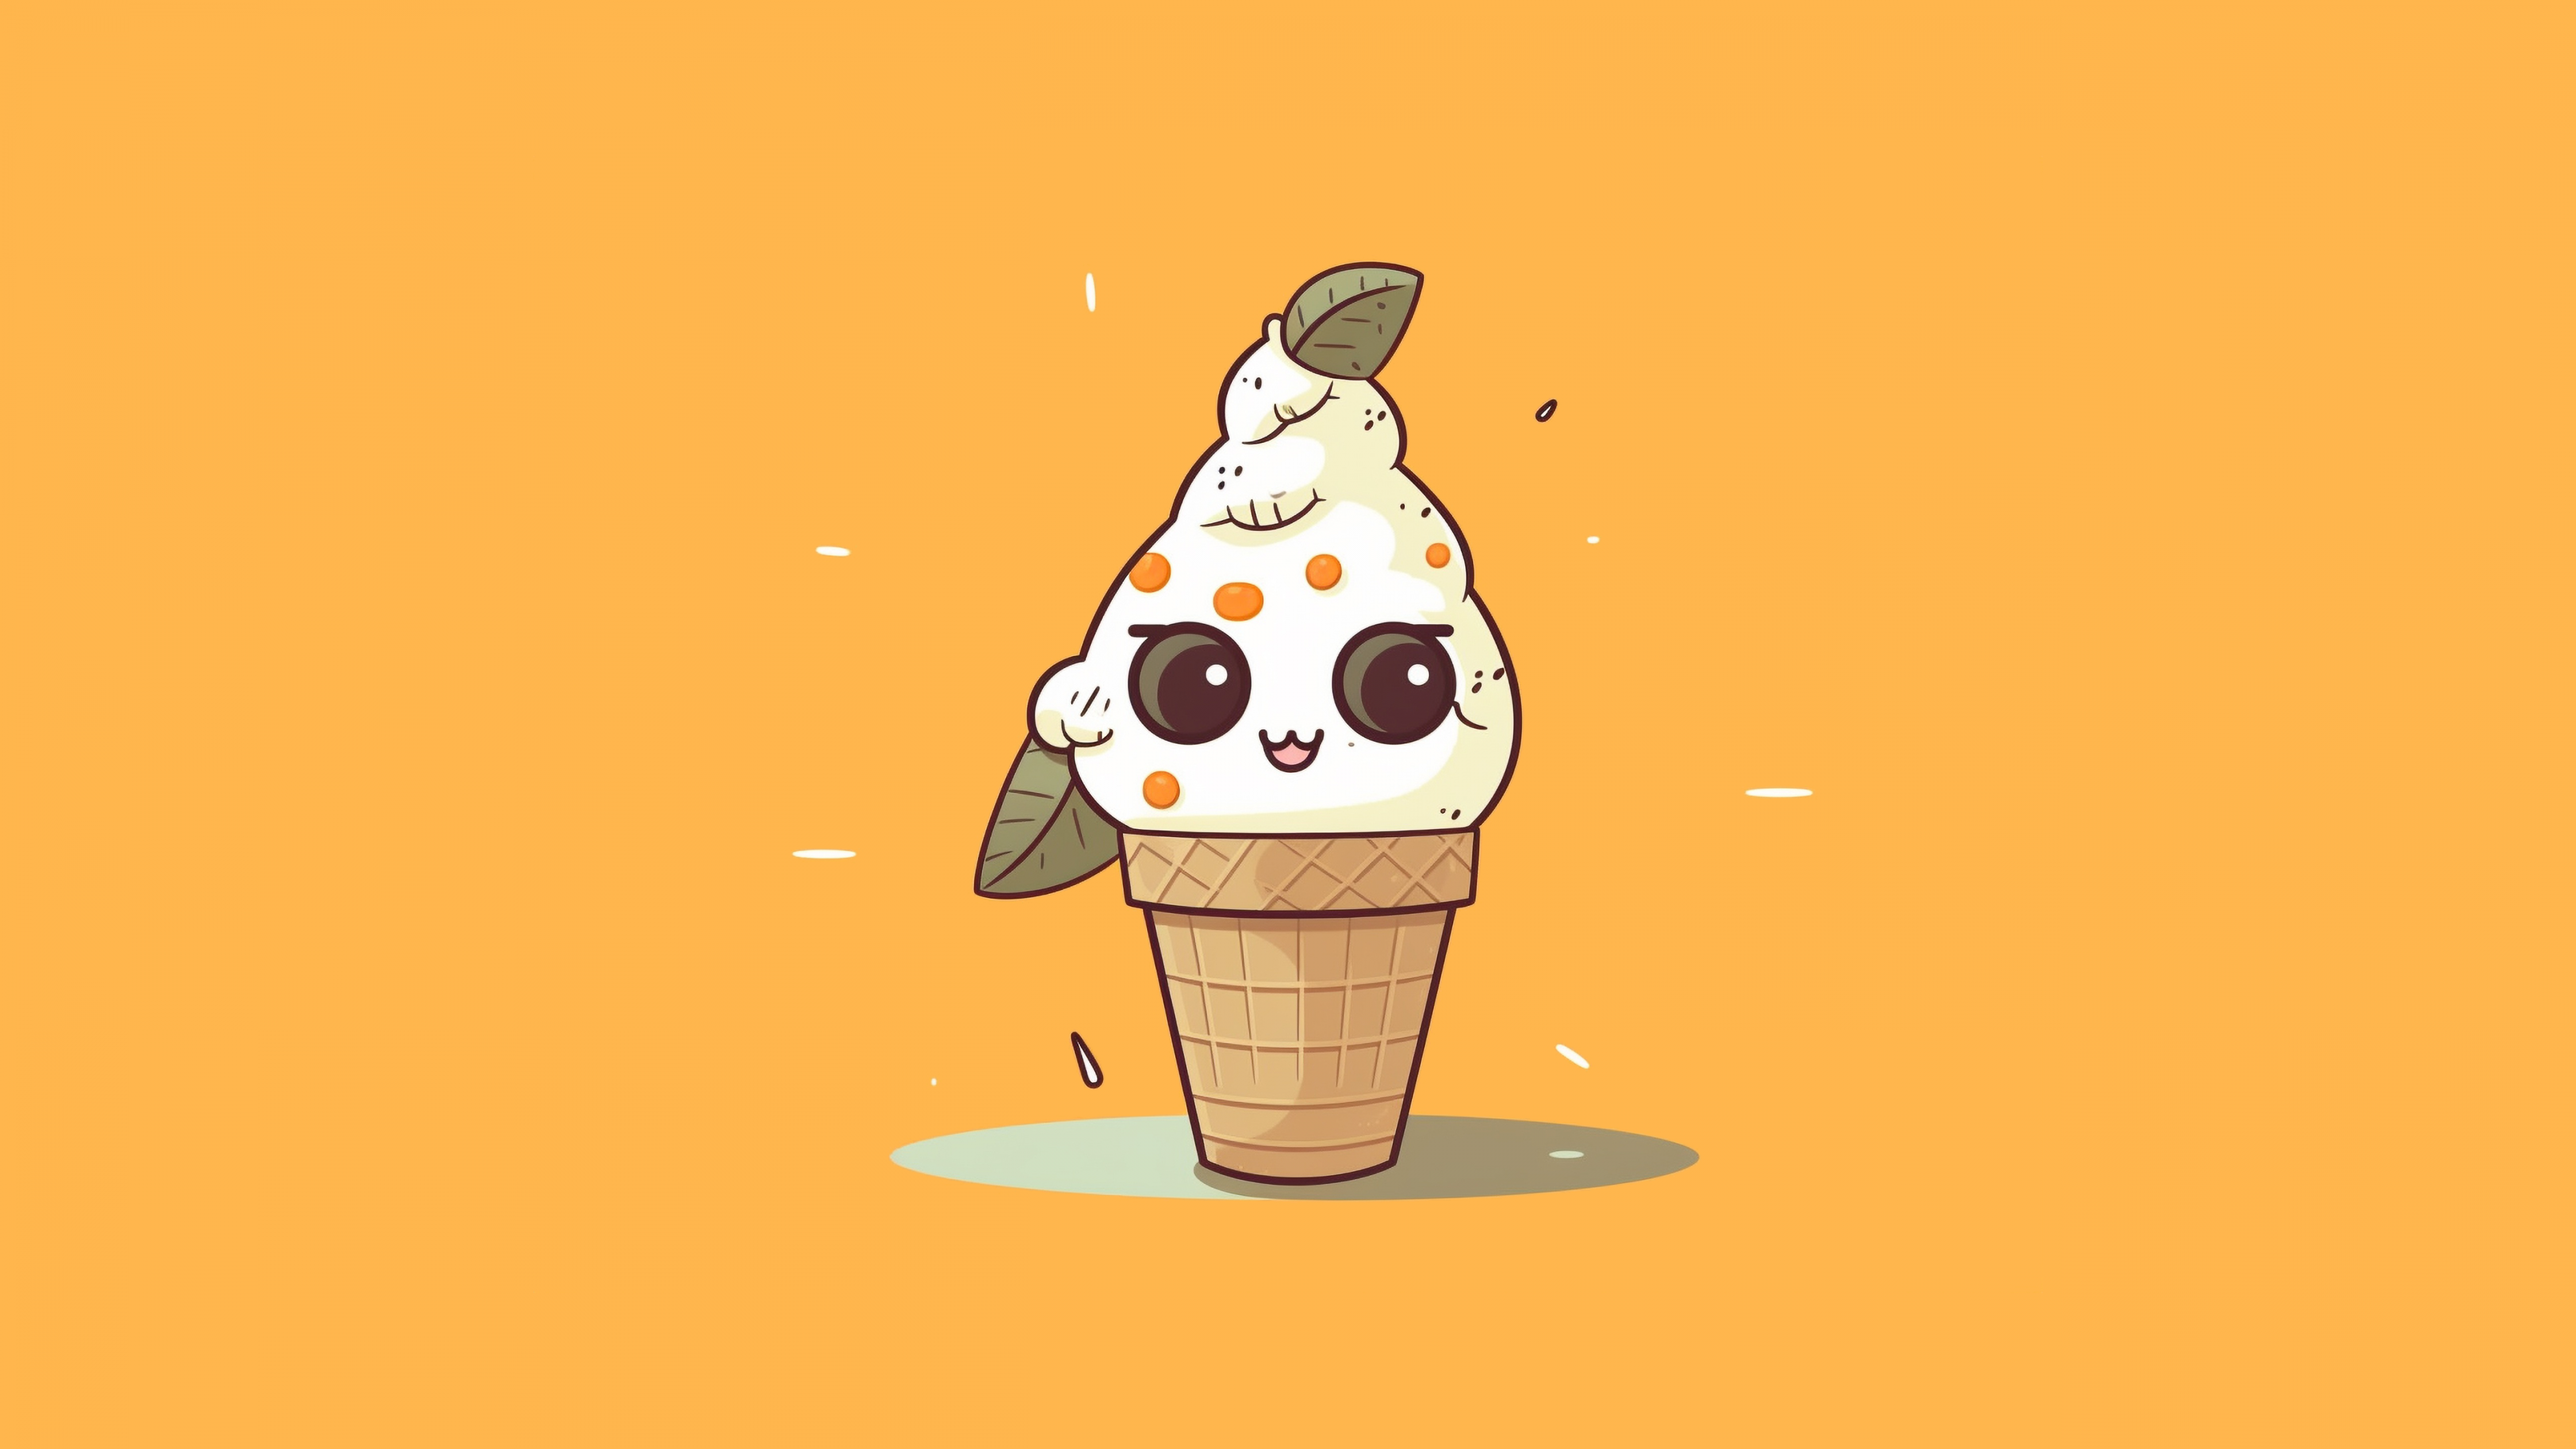 Ice cream ipad air ipad air 2 ipad 3 ipad 4 ipad mini 2 ipad mini 3  ipad mini 4 ipad pro 97 for parallax wallpapers hd desktop backgrounds  2780x2780 images and pictures